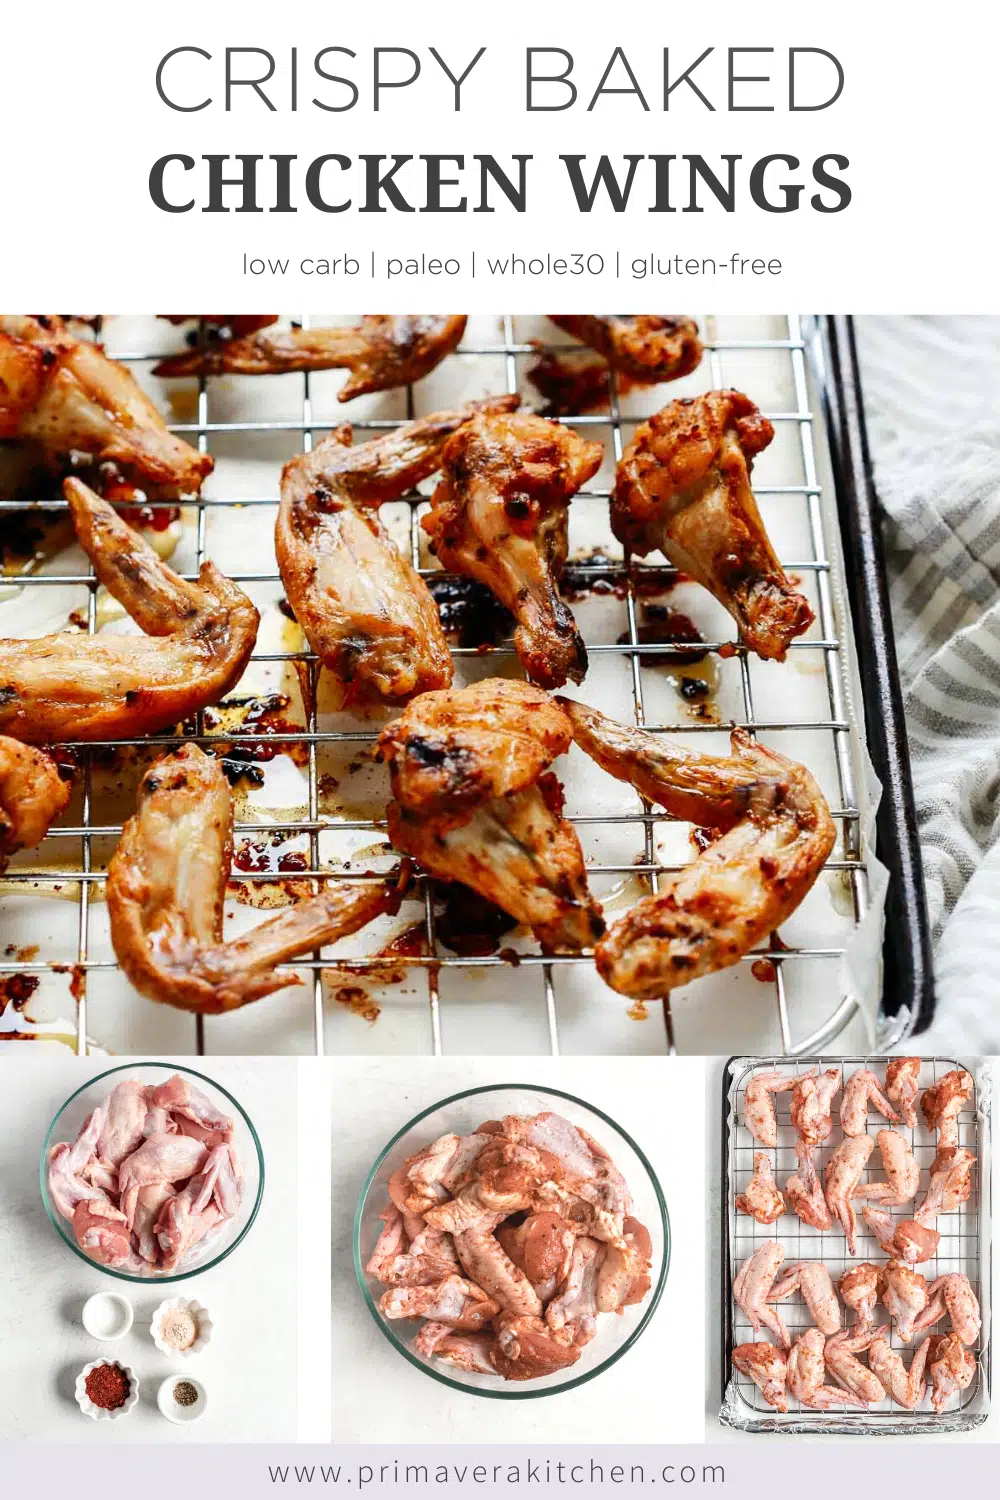 titled photo collage (and shown): Crispy baked chicken wings 